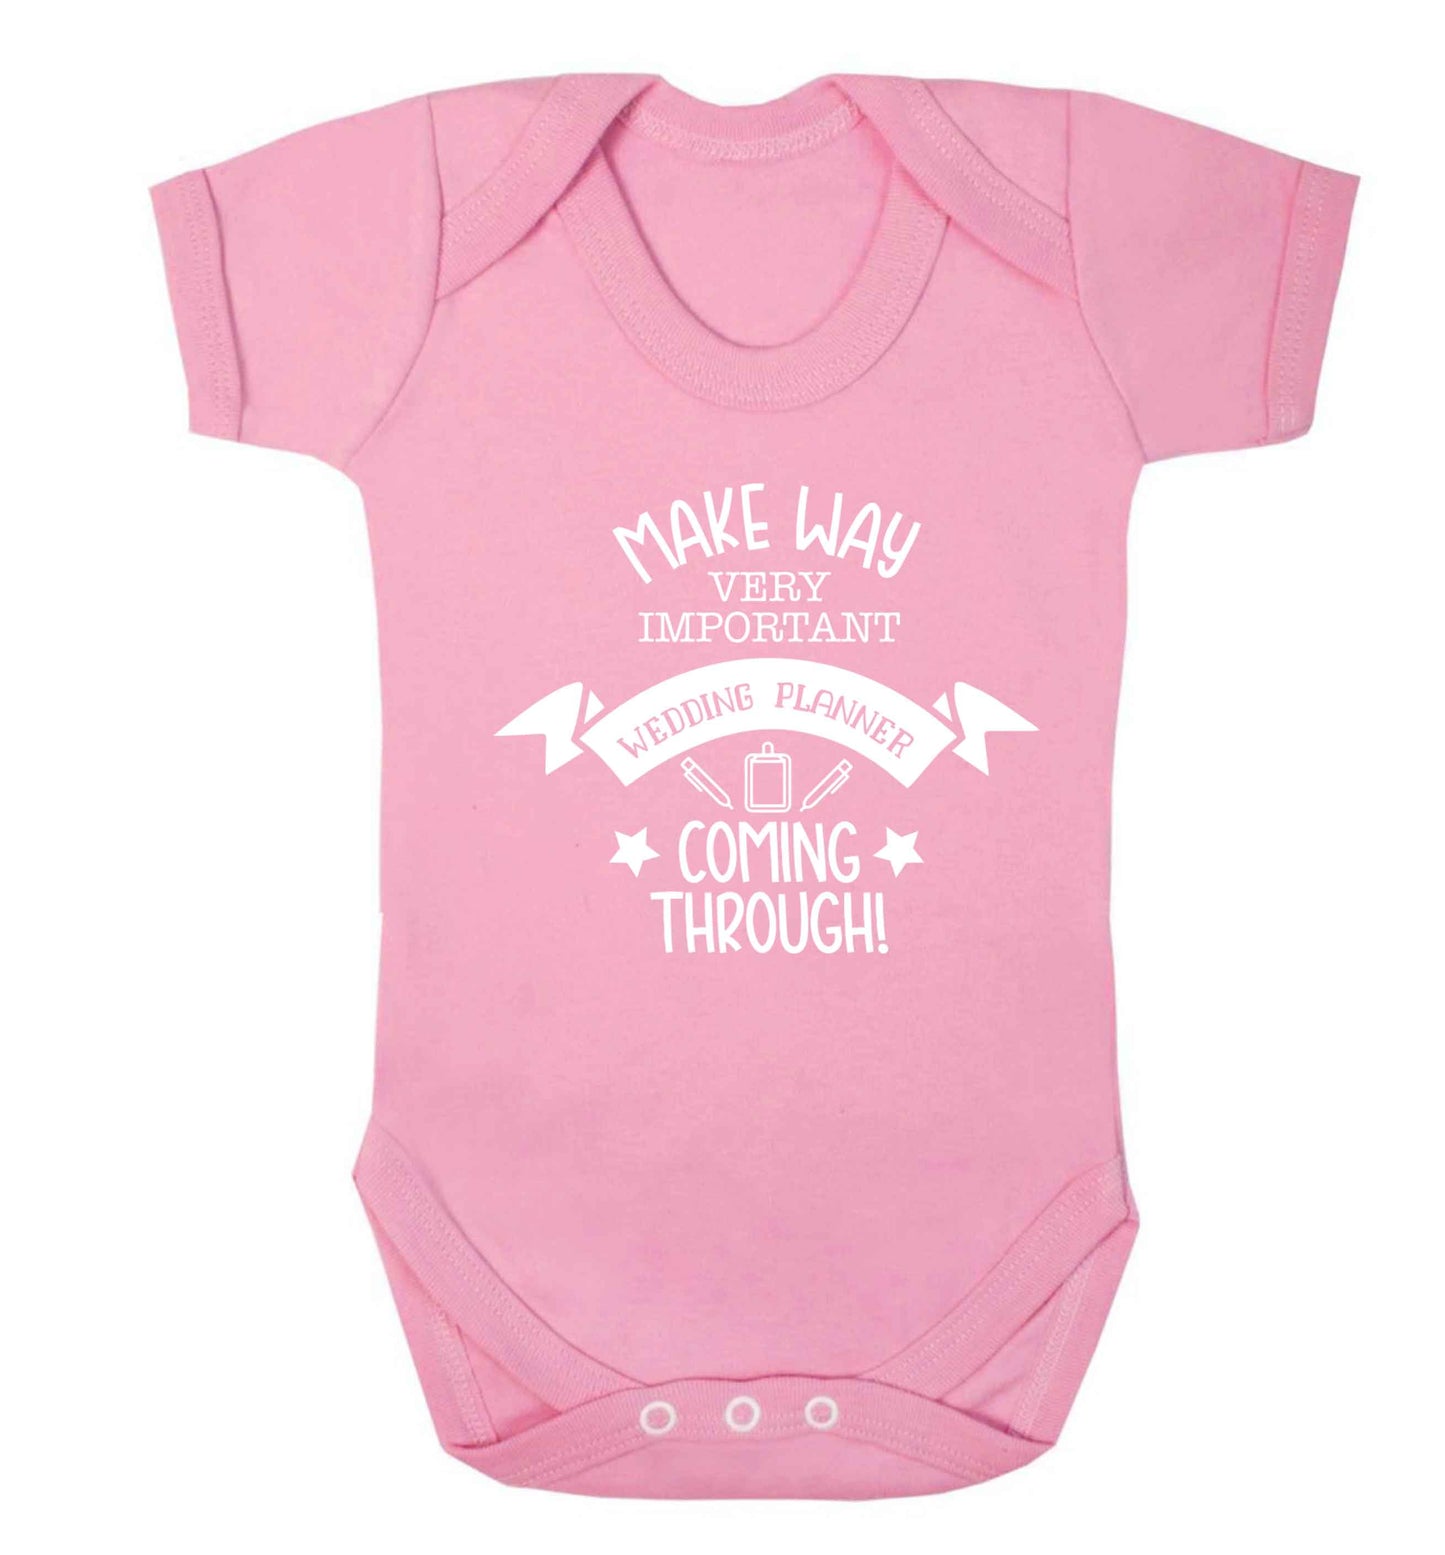 Make way very important wedding planner coming through Baby Vest pale pink 18-24 months